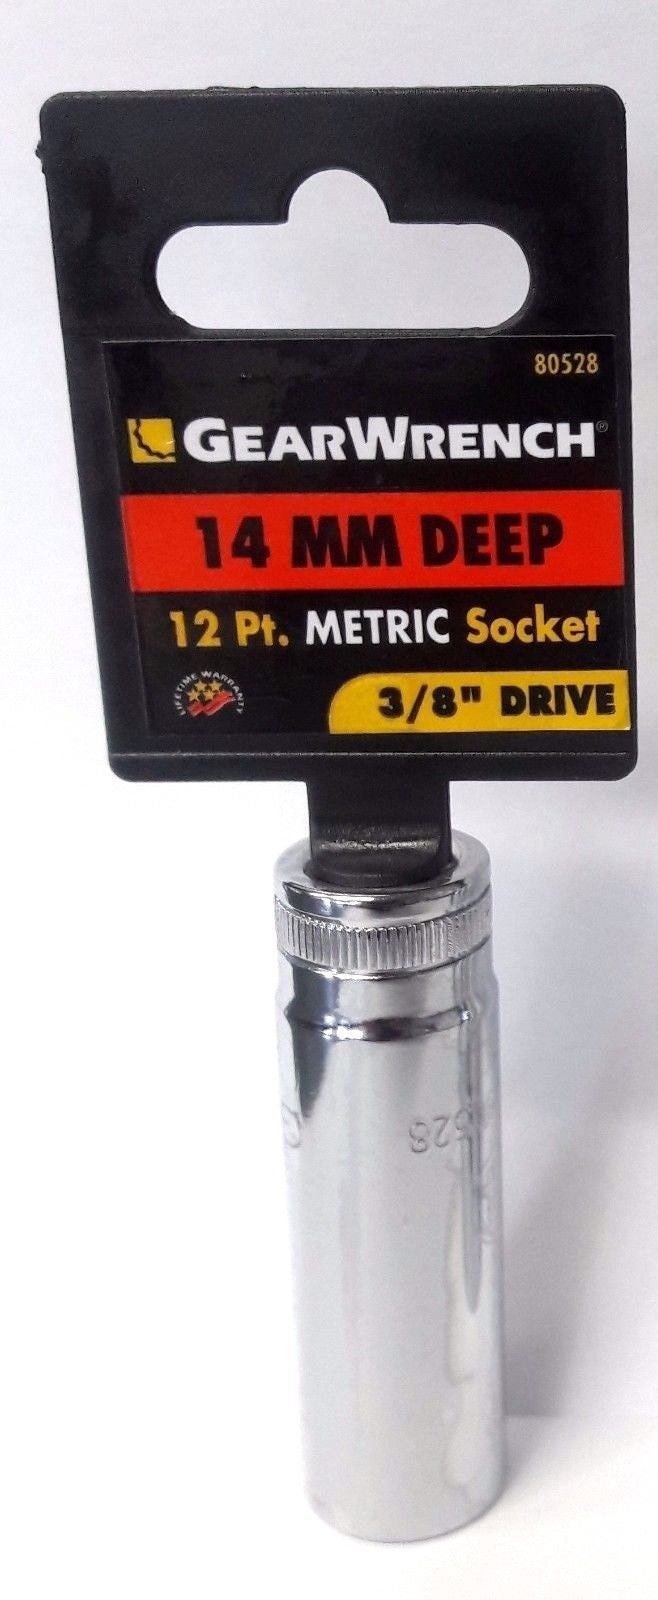 Gearwrench 80528 3/8" Drive 12 point Deep Socket 14mm